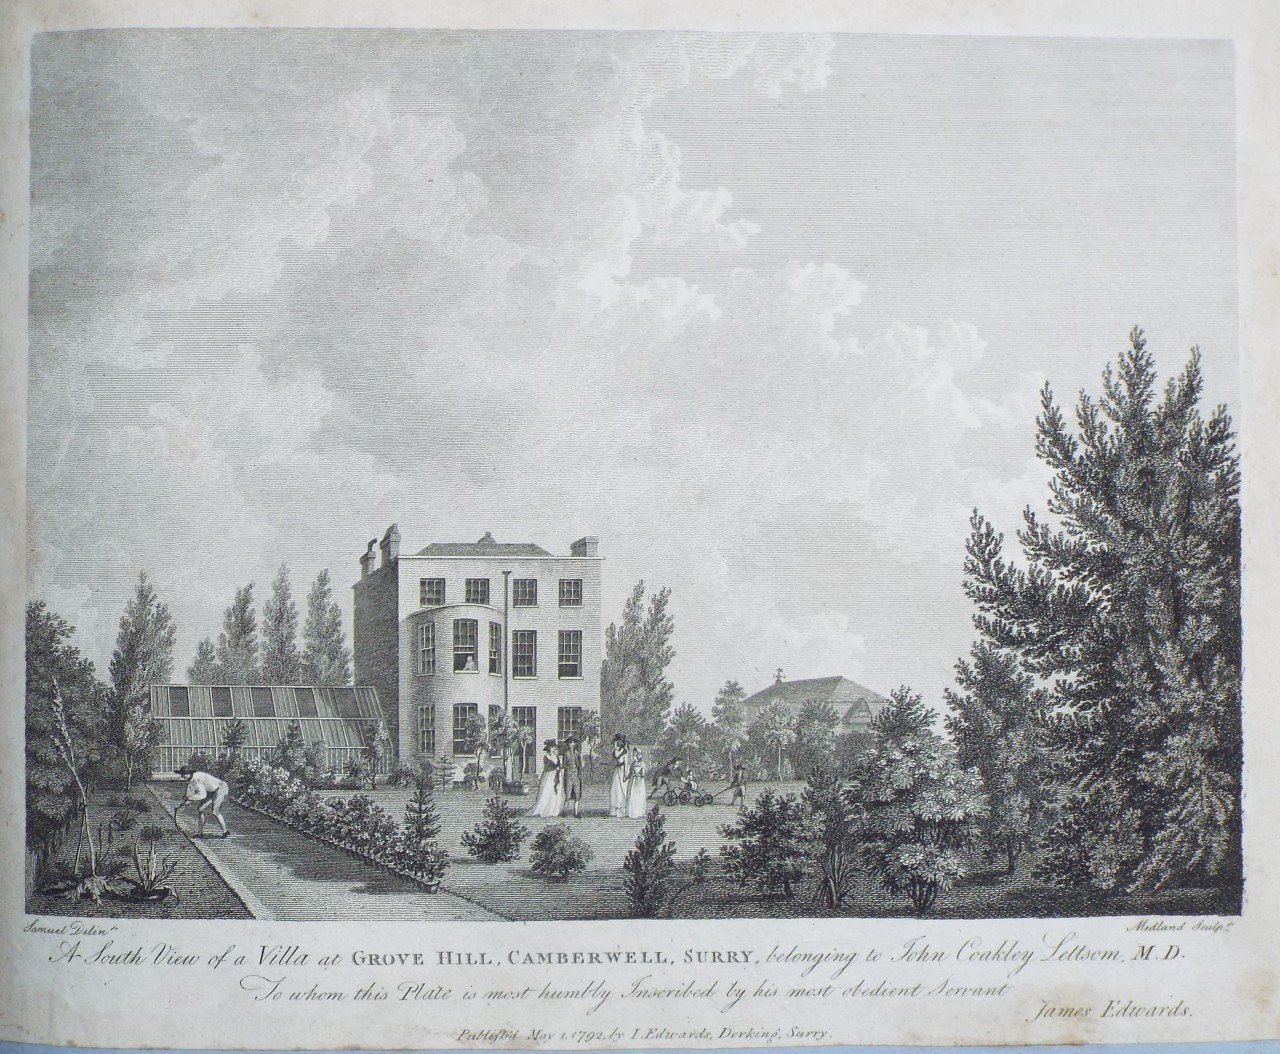 Print - A South View of a Villa at Grove Hill, Camberwell, Surry, belonging to John Coakley Lettsom, M.D. - 